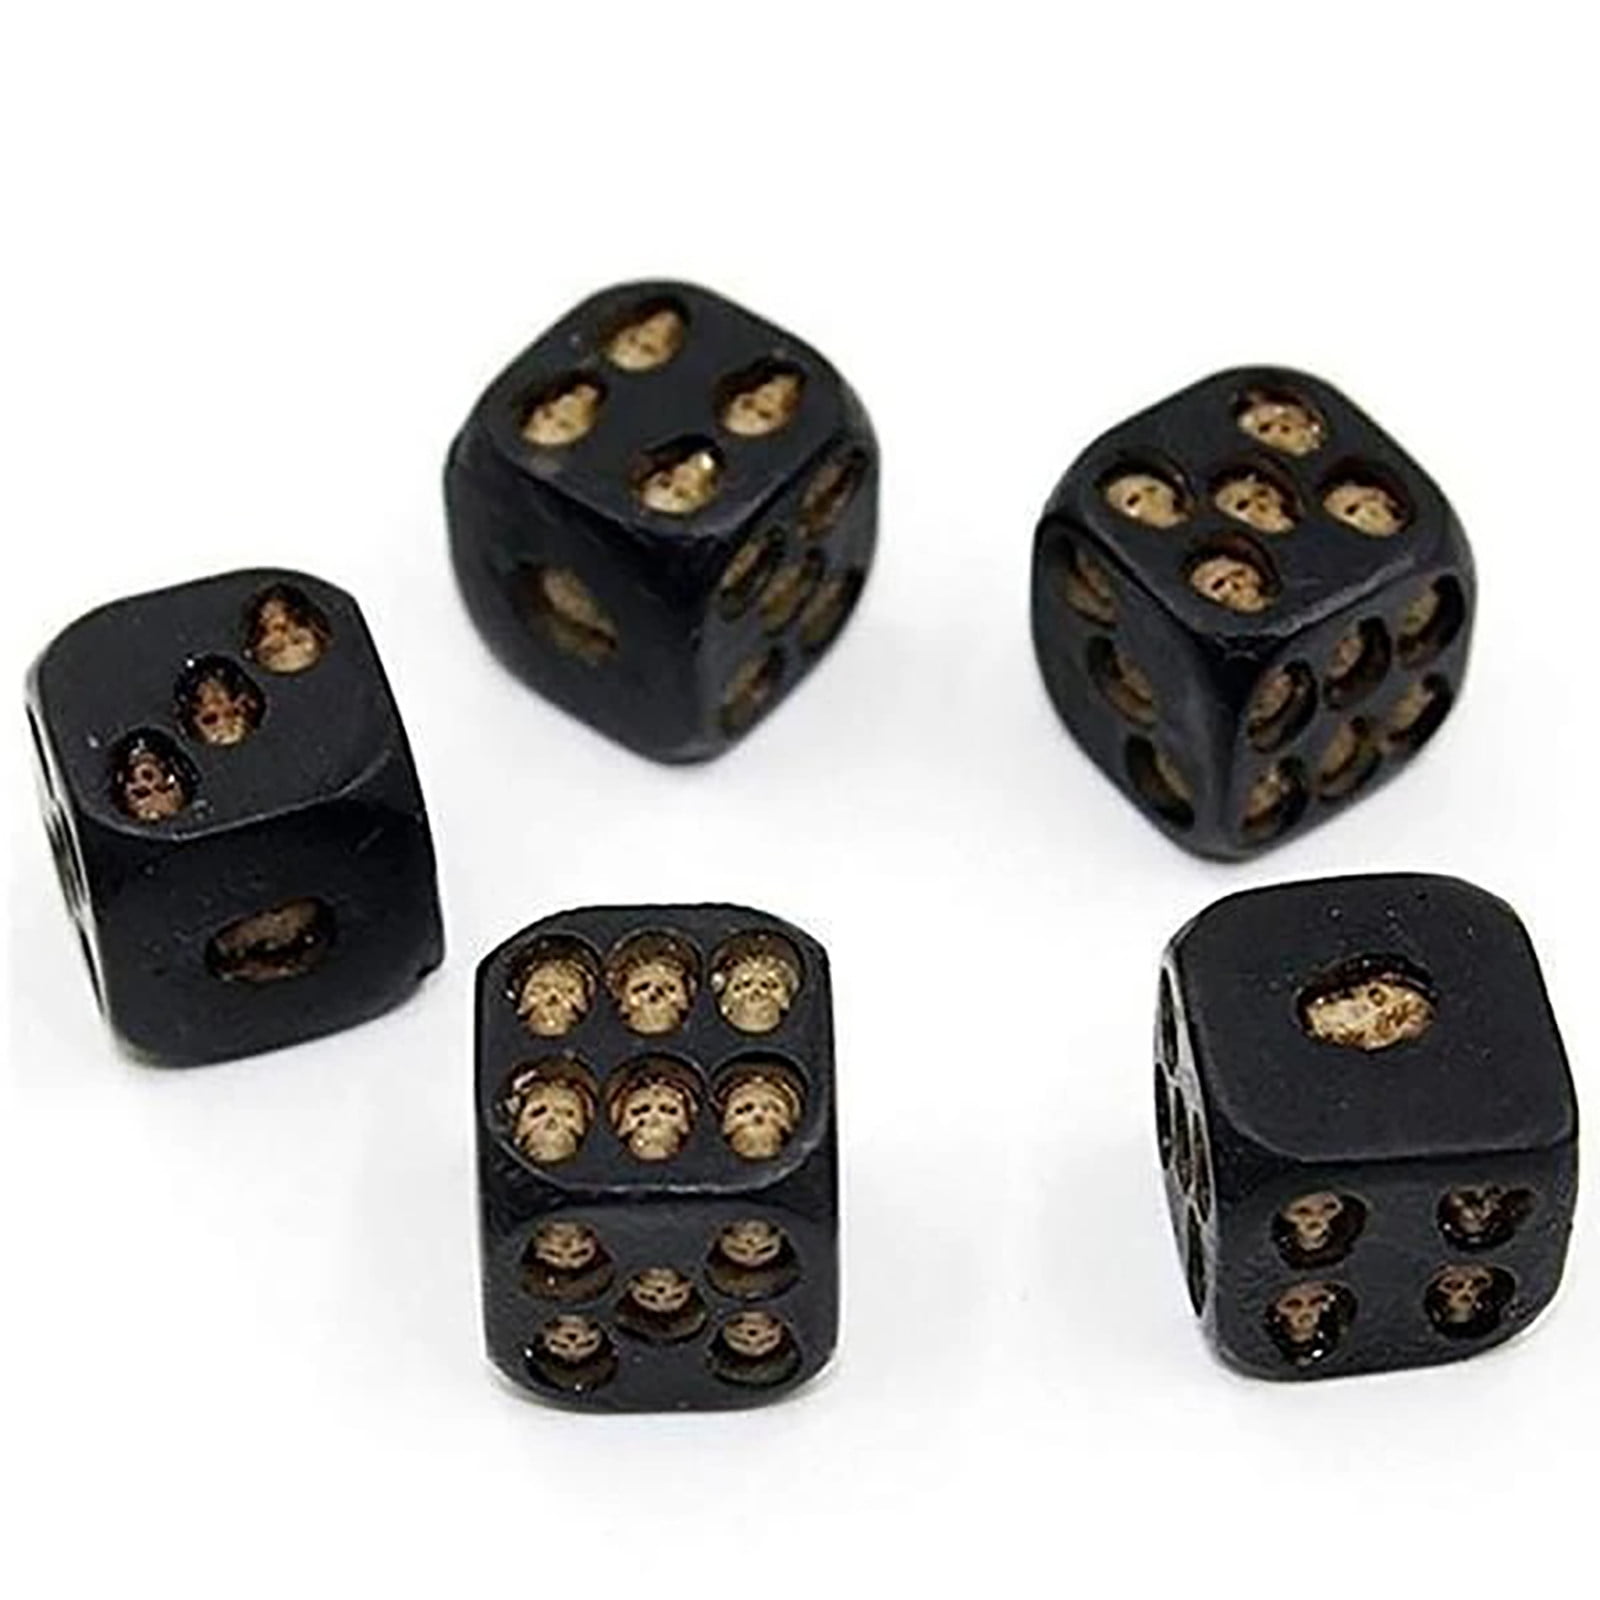 Skull Beige Leather Dice Cup 